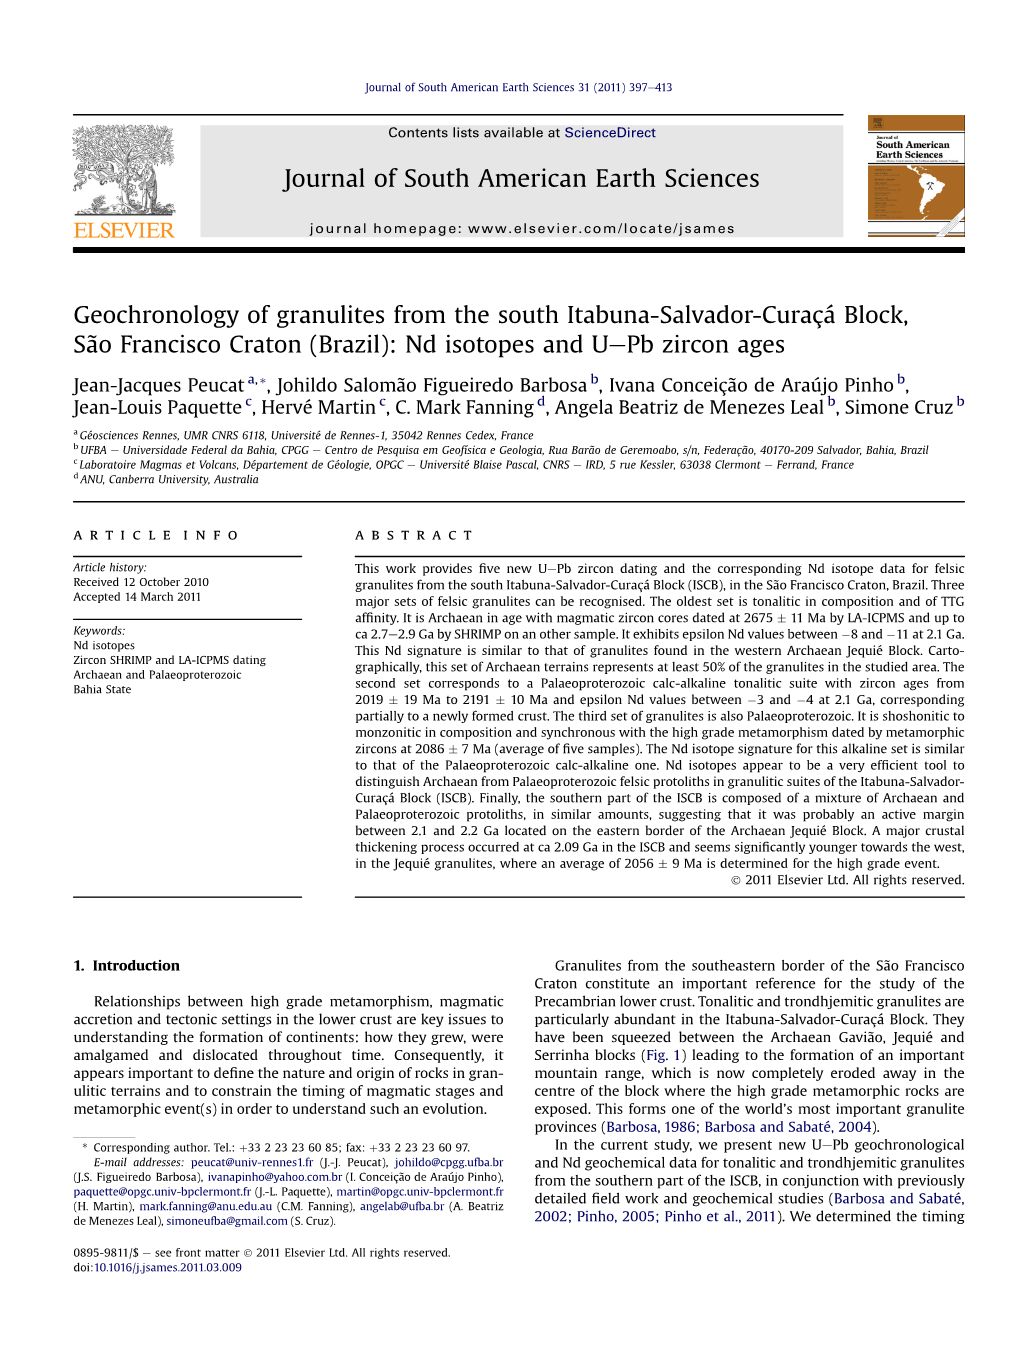 Geochronology of Granulites from the South Itabuna-Salvador-Curaçá Block, São Francisco Craton (Brazil): Nd Isotopes and Uepb Zircon Ages